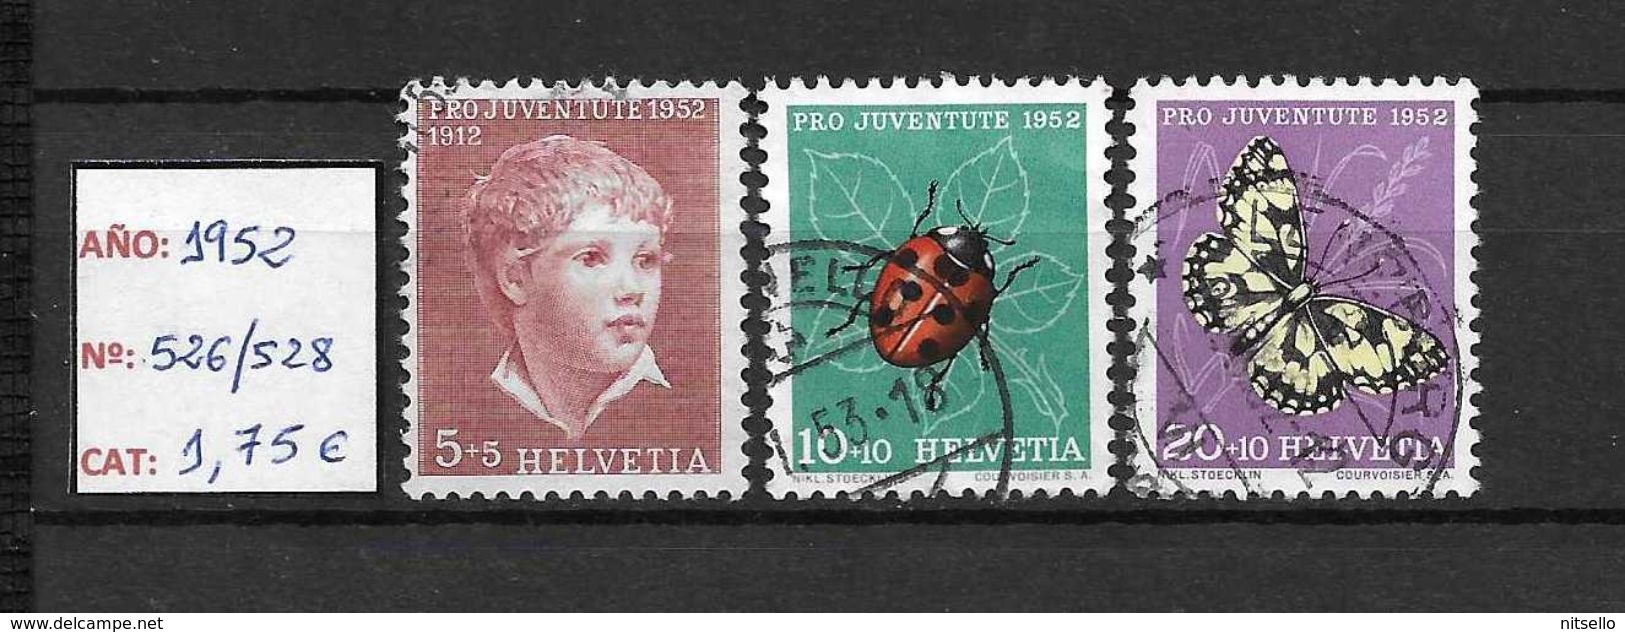 LOTE 1377  ///  SUIZA 1952   YVERT Nº: 526/528  //  CATALOG/COTE: 1,75 € - Used Stamps